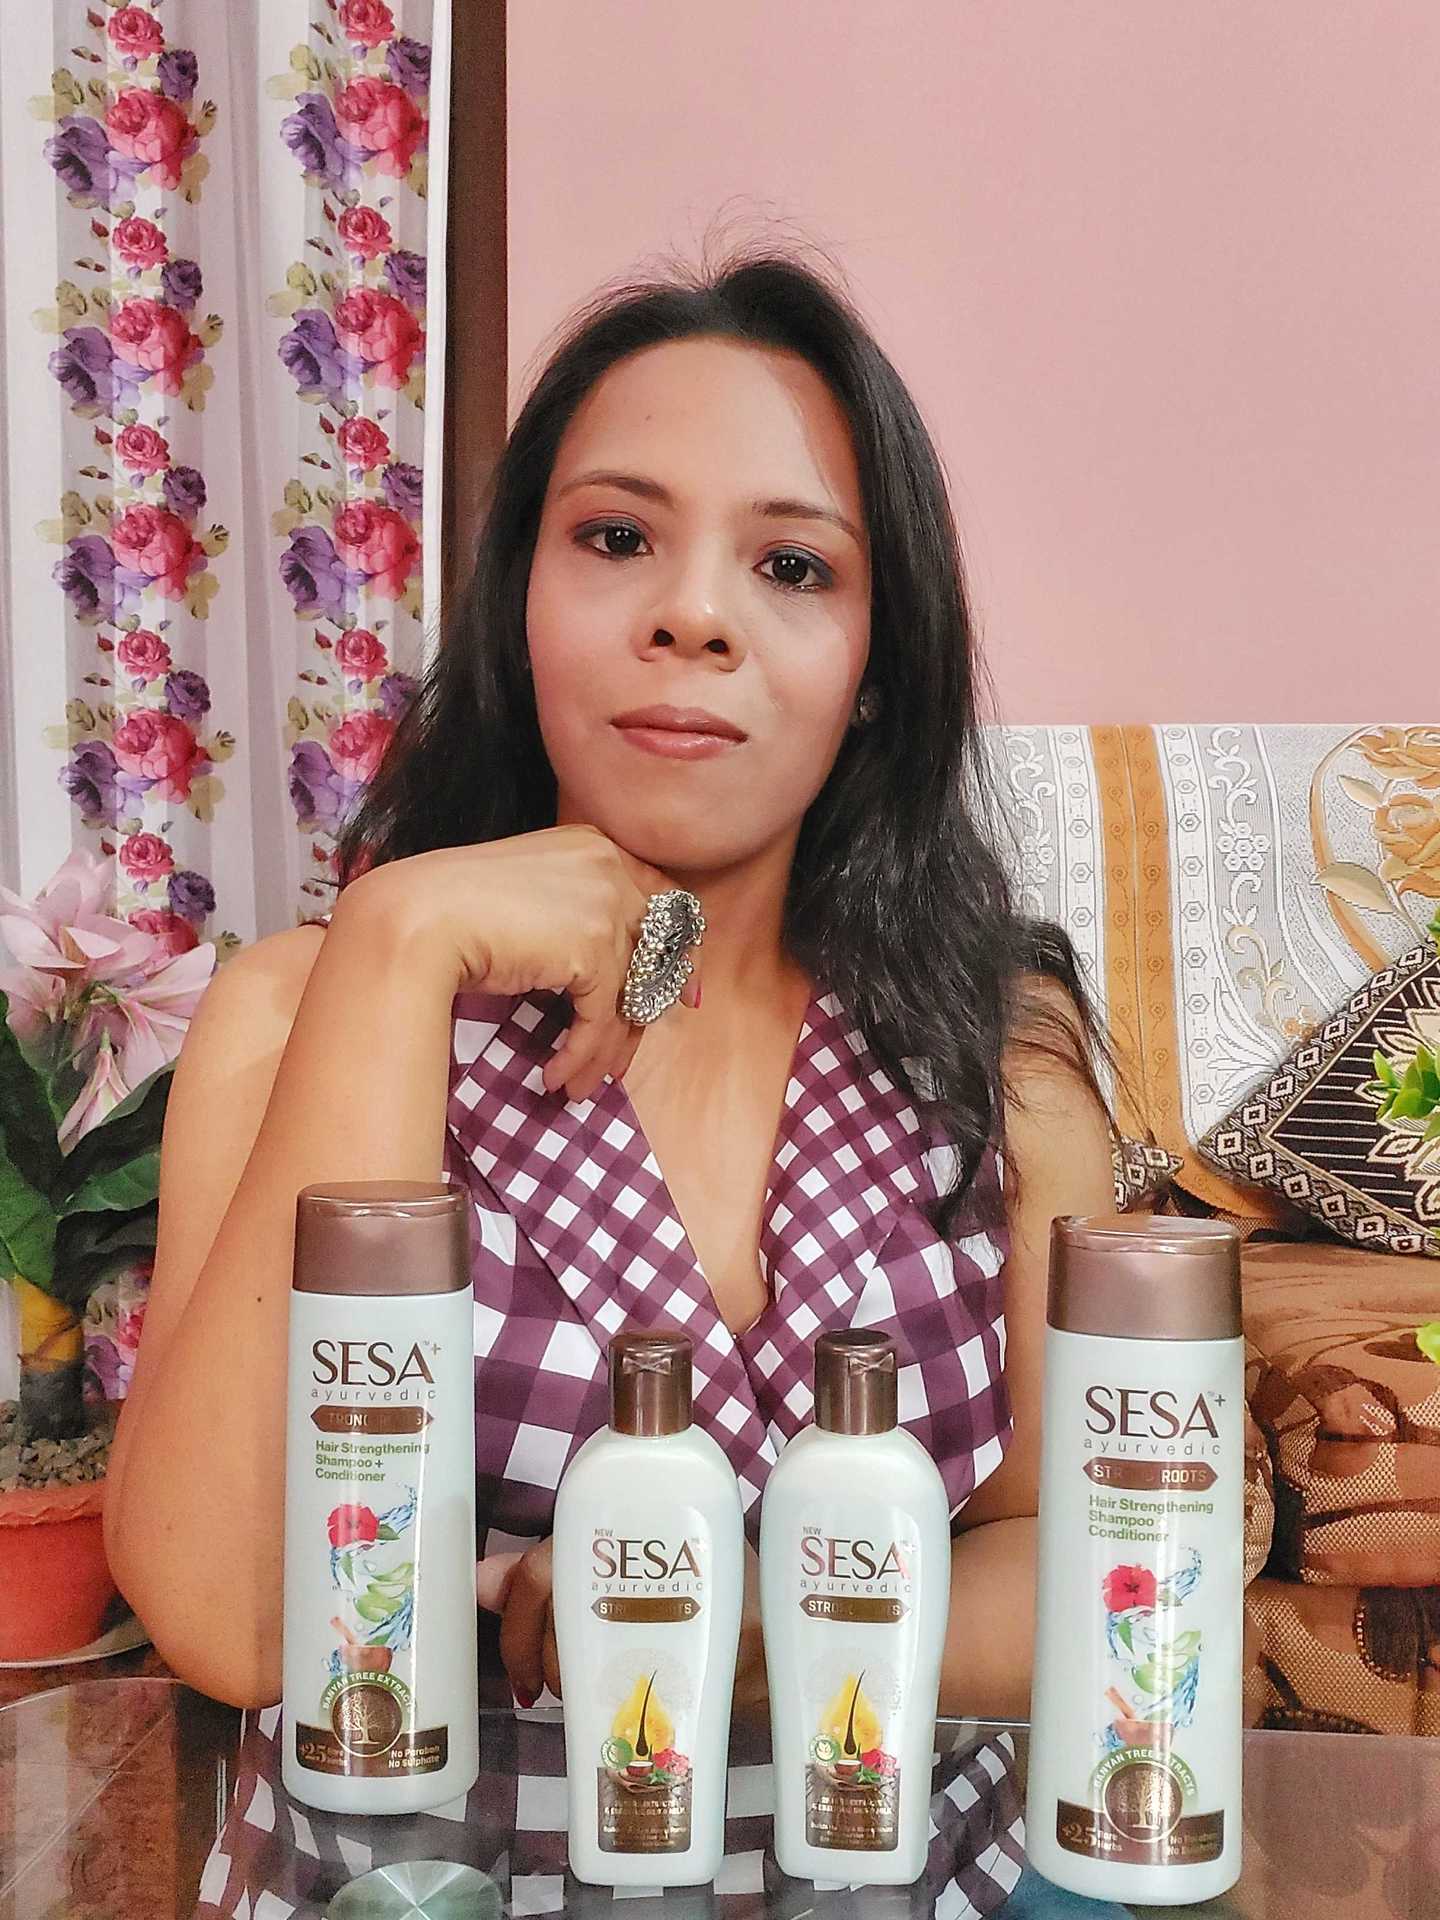 TWO HONEST HAIR CARE PRODUCTS FROM SESA THAT ARE EFFECTIVE WITH HAIR FALL CONTROL, HAIR GROWTH, DANDRUFF AND DAMAGE REPAIR  image